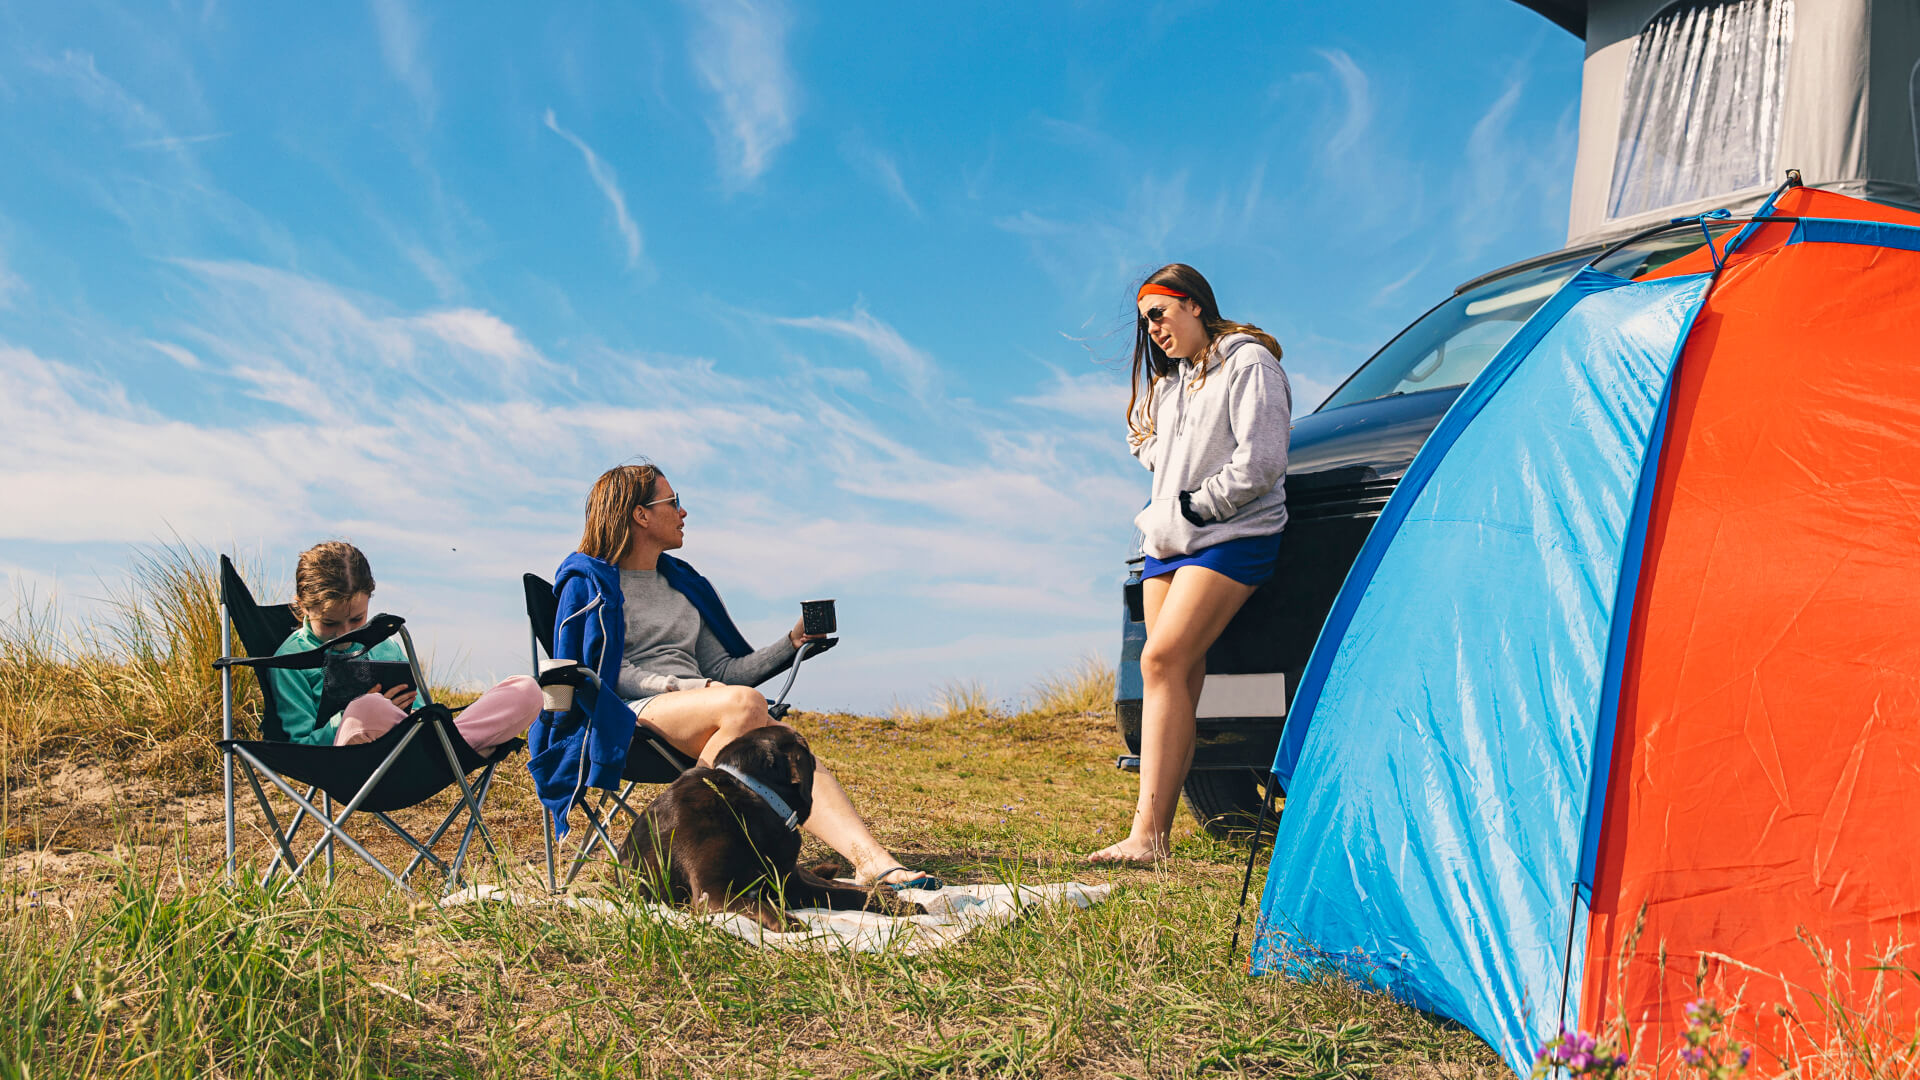 Great Ways to Spend Your Evenings on Your Next Grown-Up Camping Trip